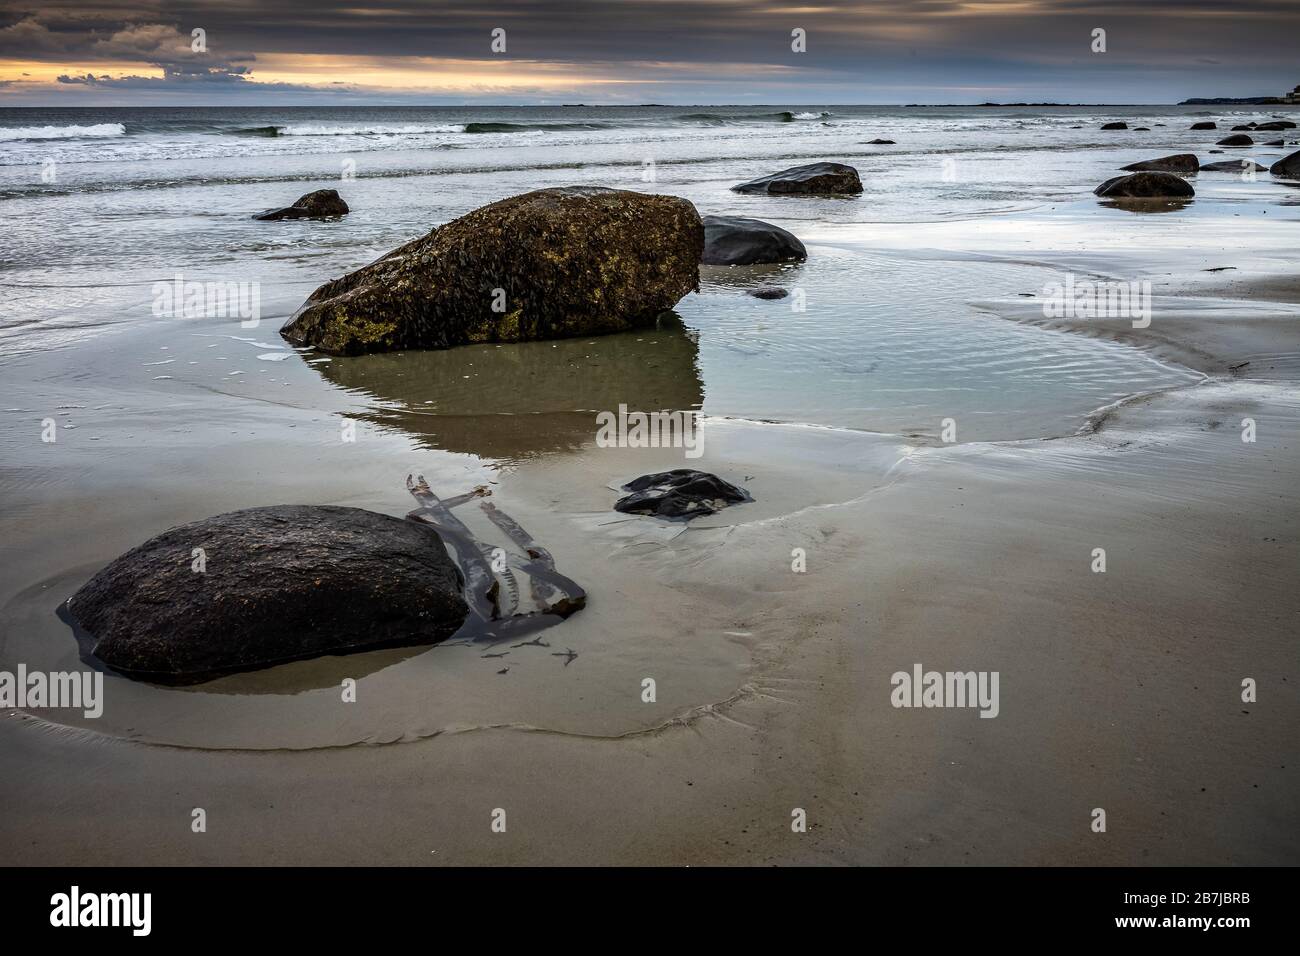 Cold winter morning light breaks on this beach at low tide, showing all the rocks alone this lonely sandy coastline. Stock Photo